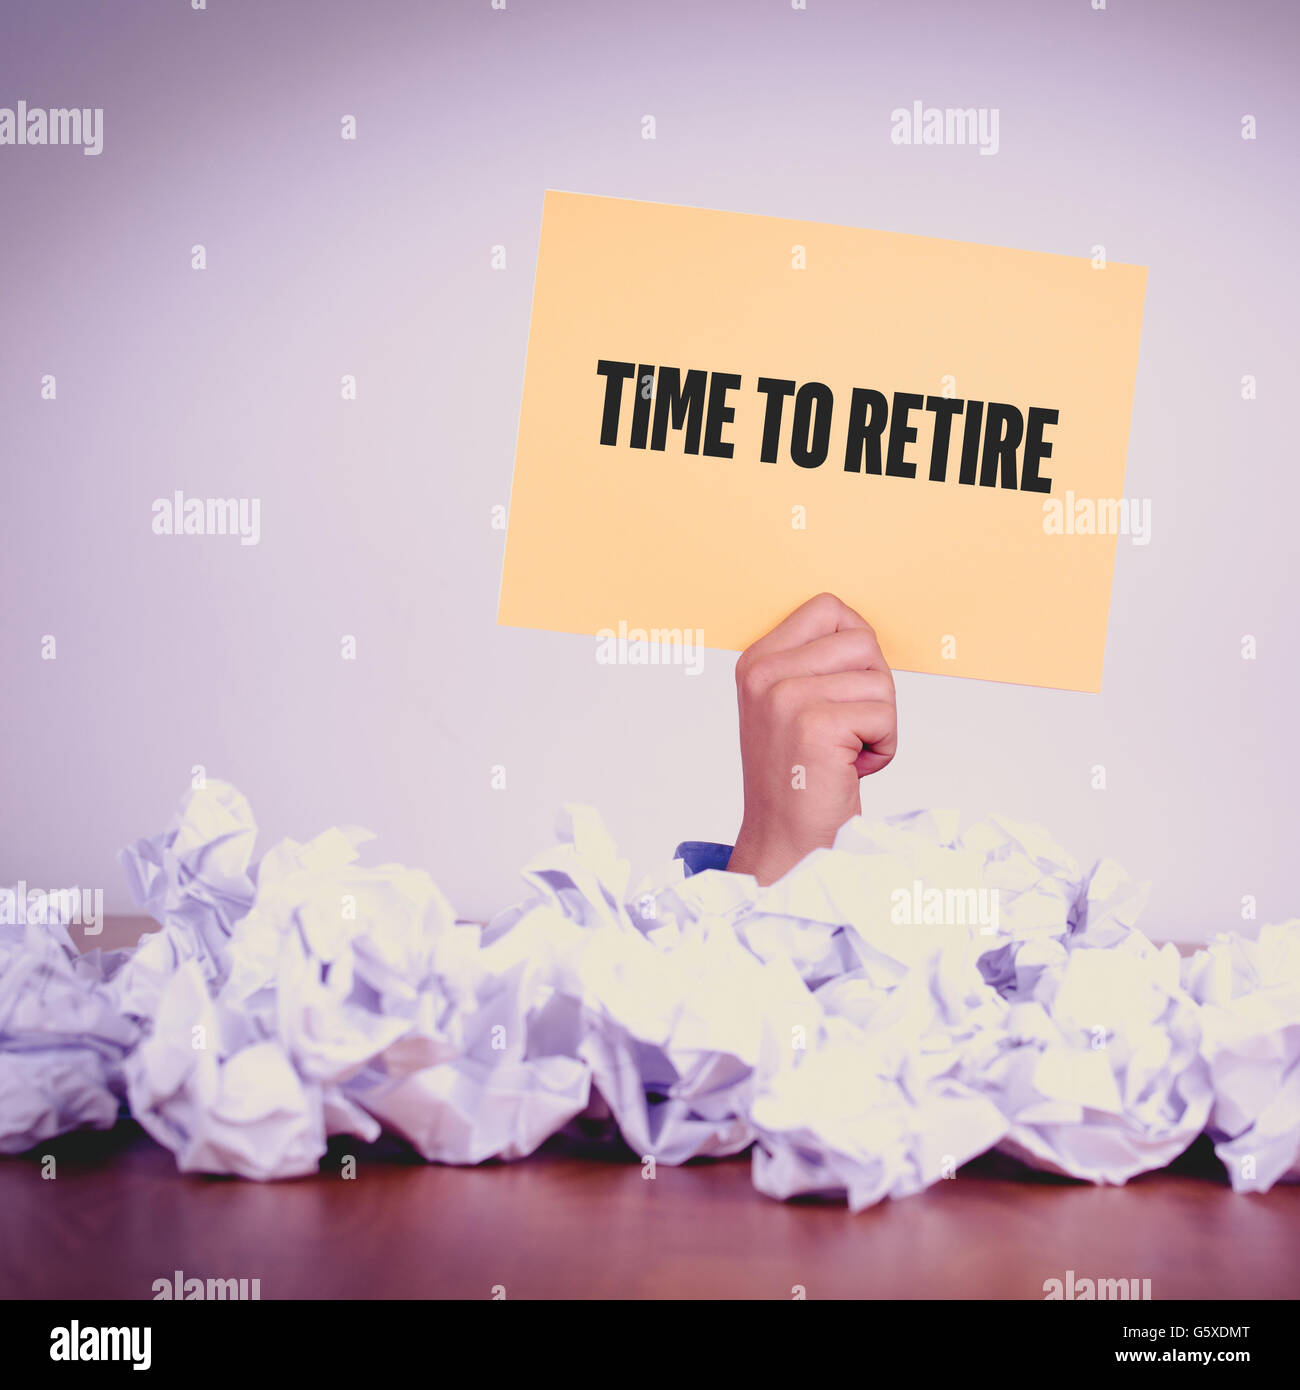 HAND HOLDING YELLOW PAPER WITH TIME TO RETIRECONCEPT Stock Photo